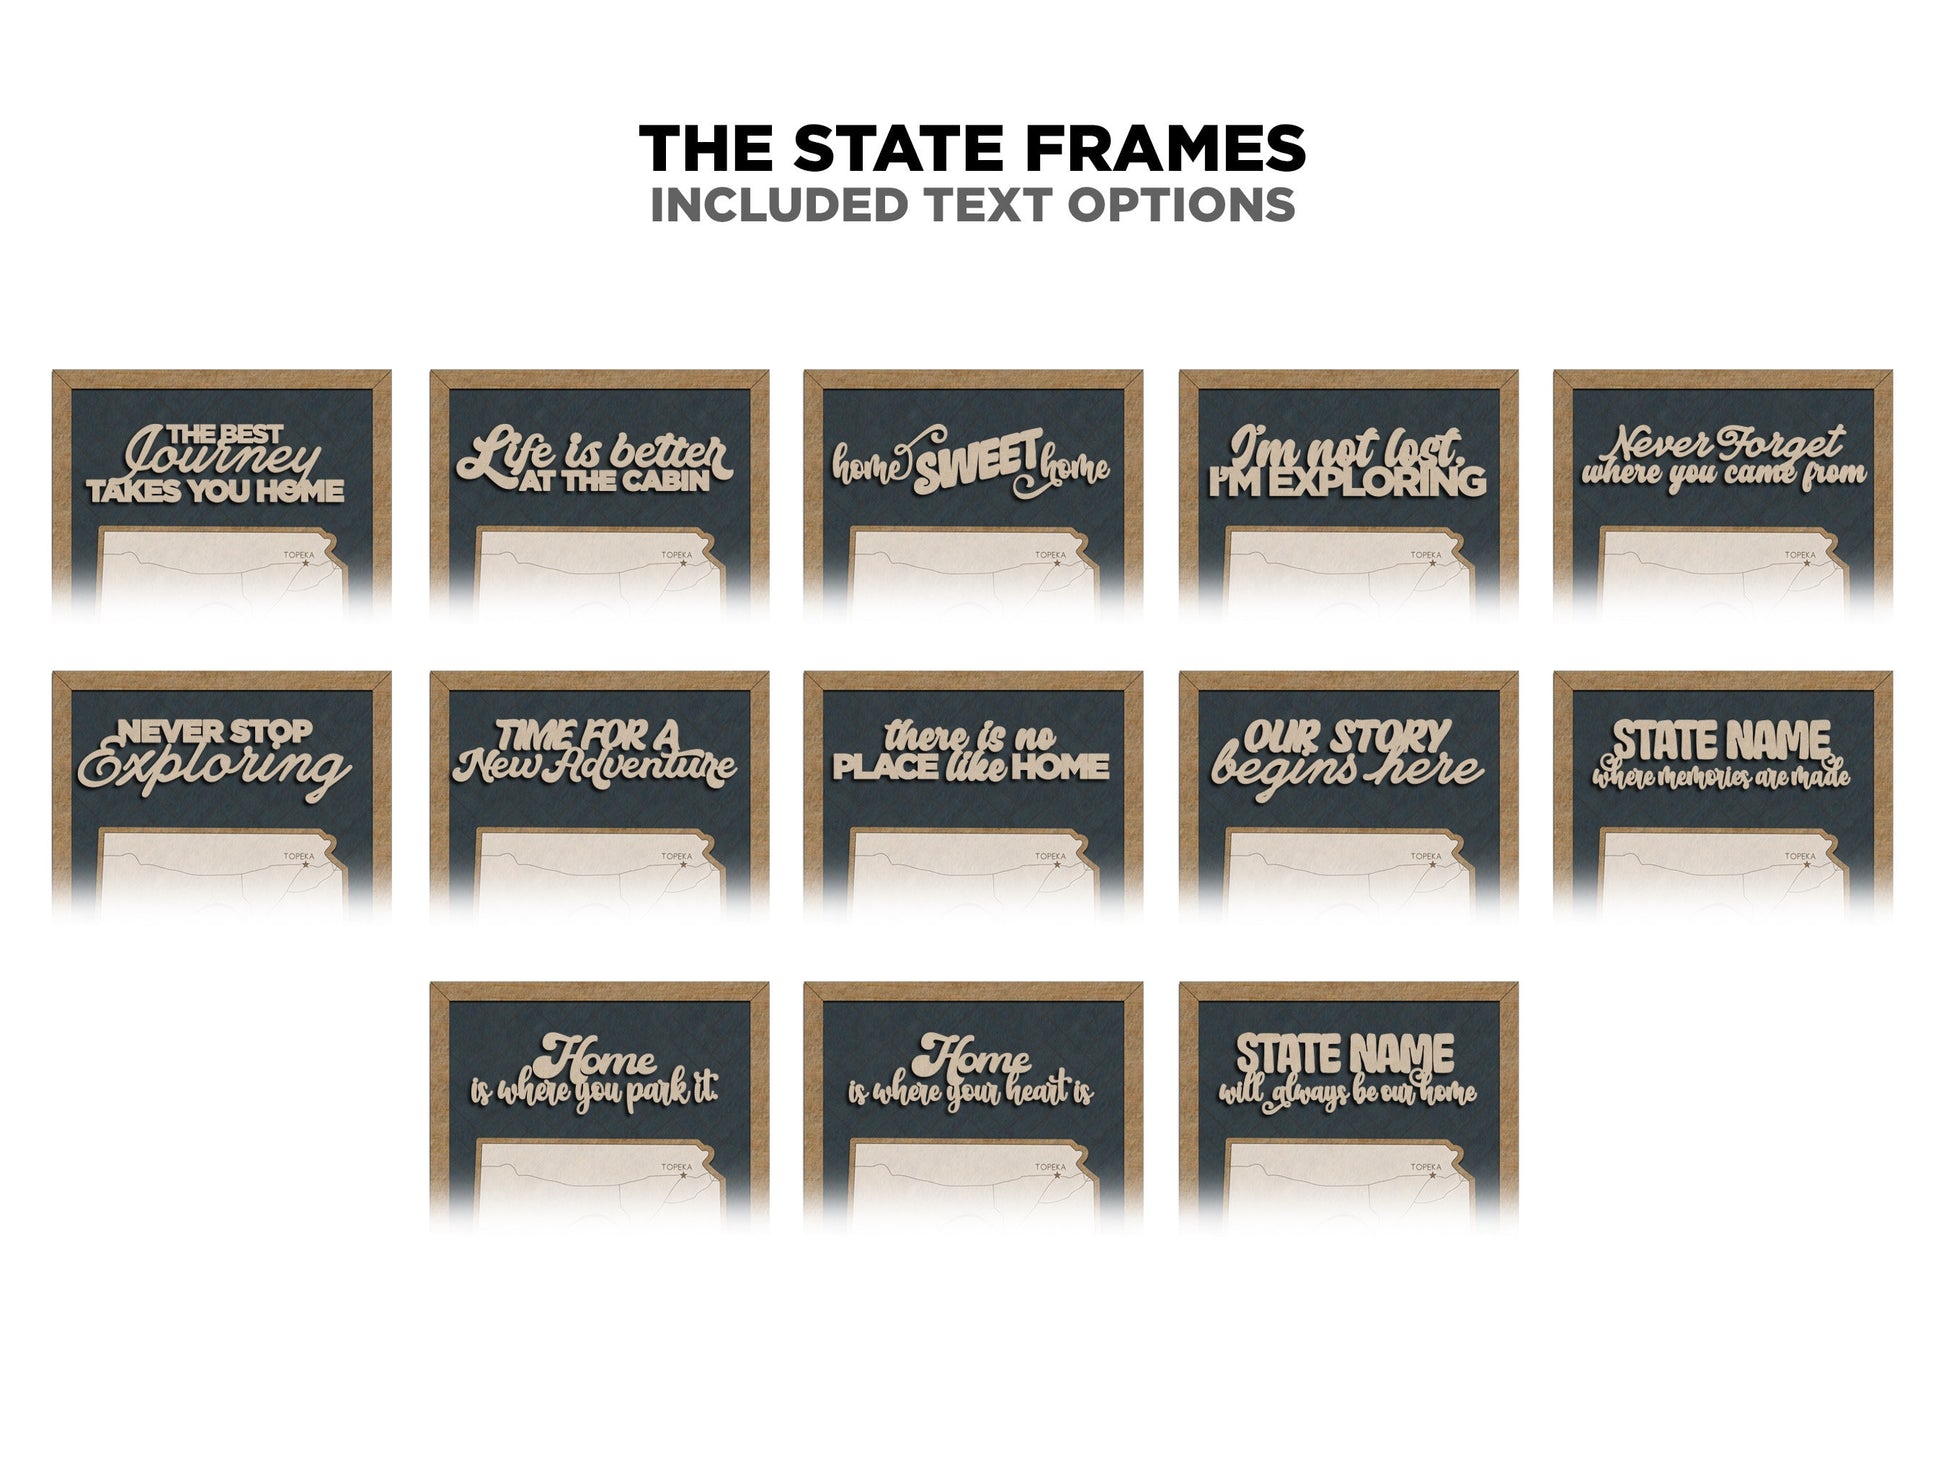 The Texas State Frame - 13 text options, 12 backgrounds, 25 icons Included - Make over 7,500 designs - Glowforge & Lightburn Tested